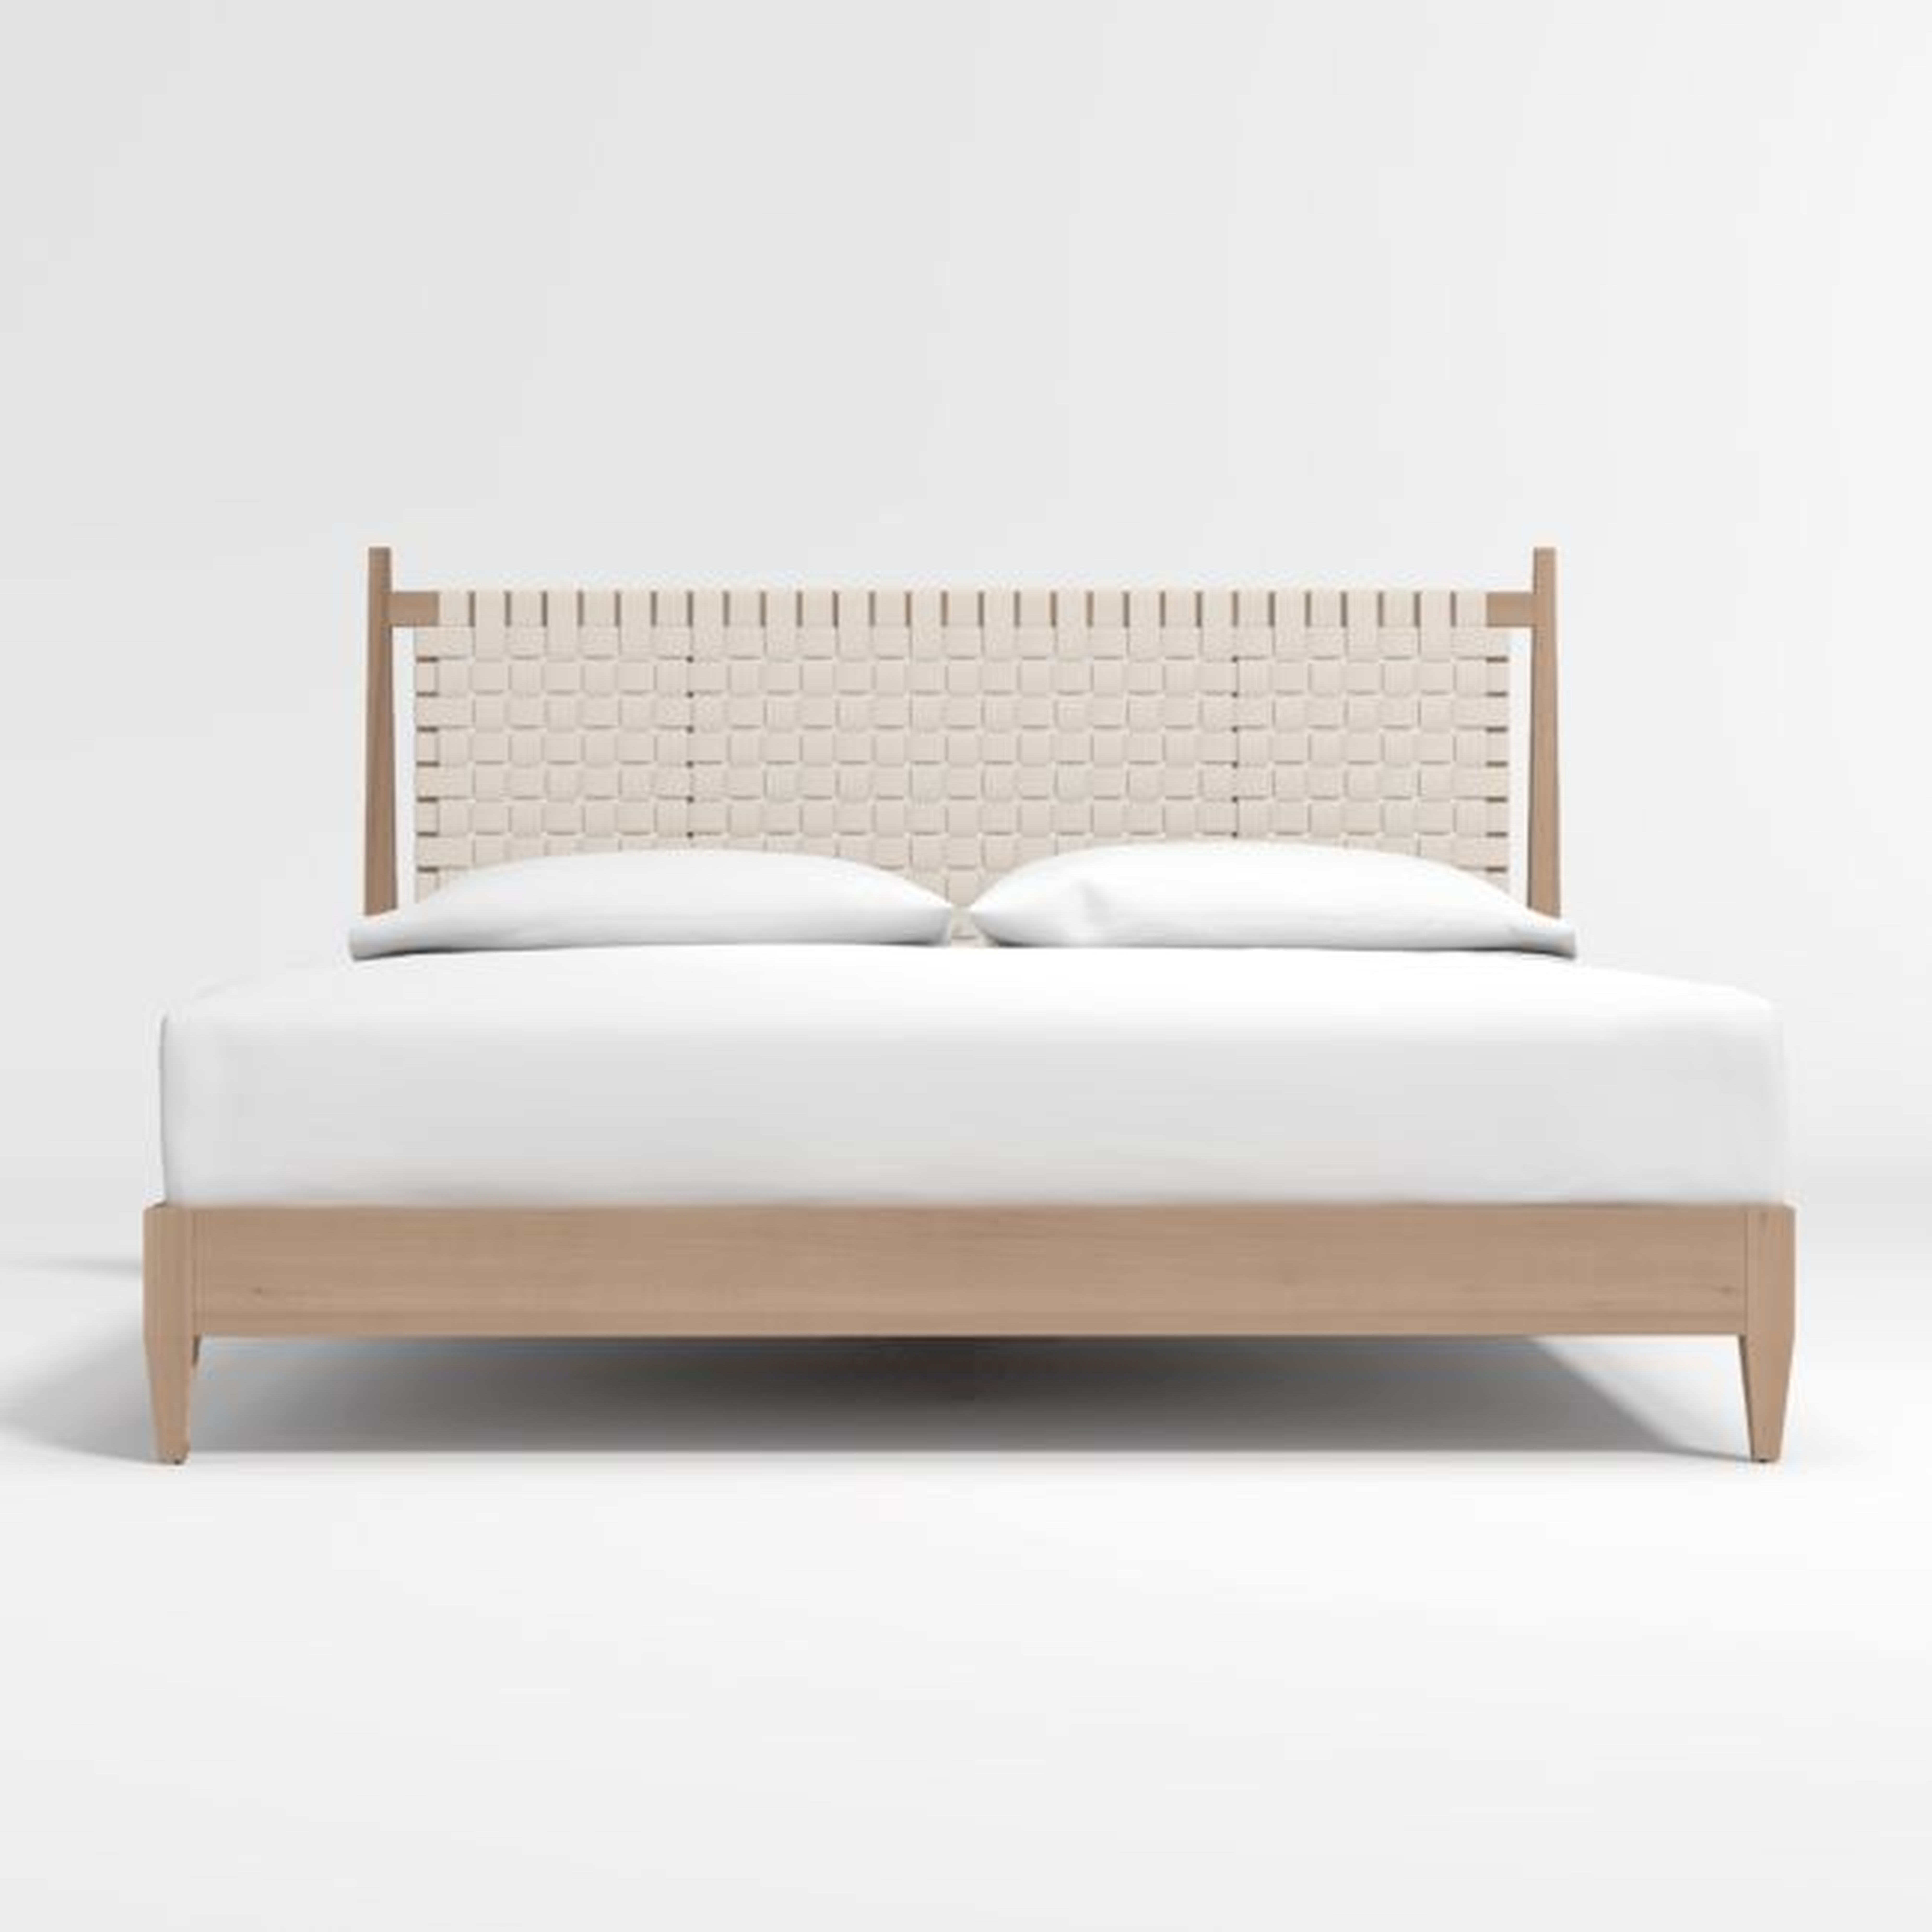 Rio Bed, Light Wash, King - Crate and Barrel